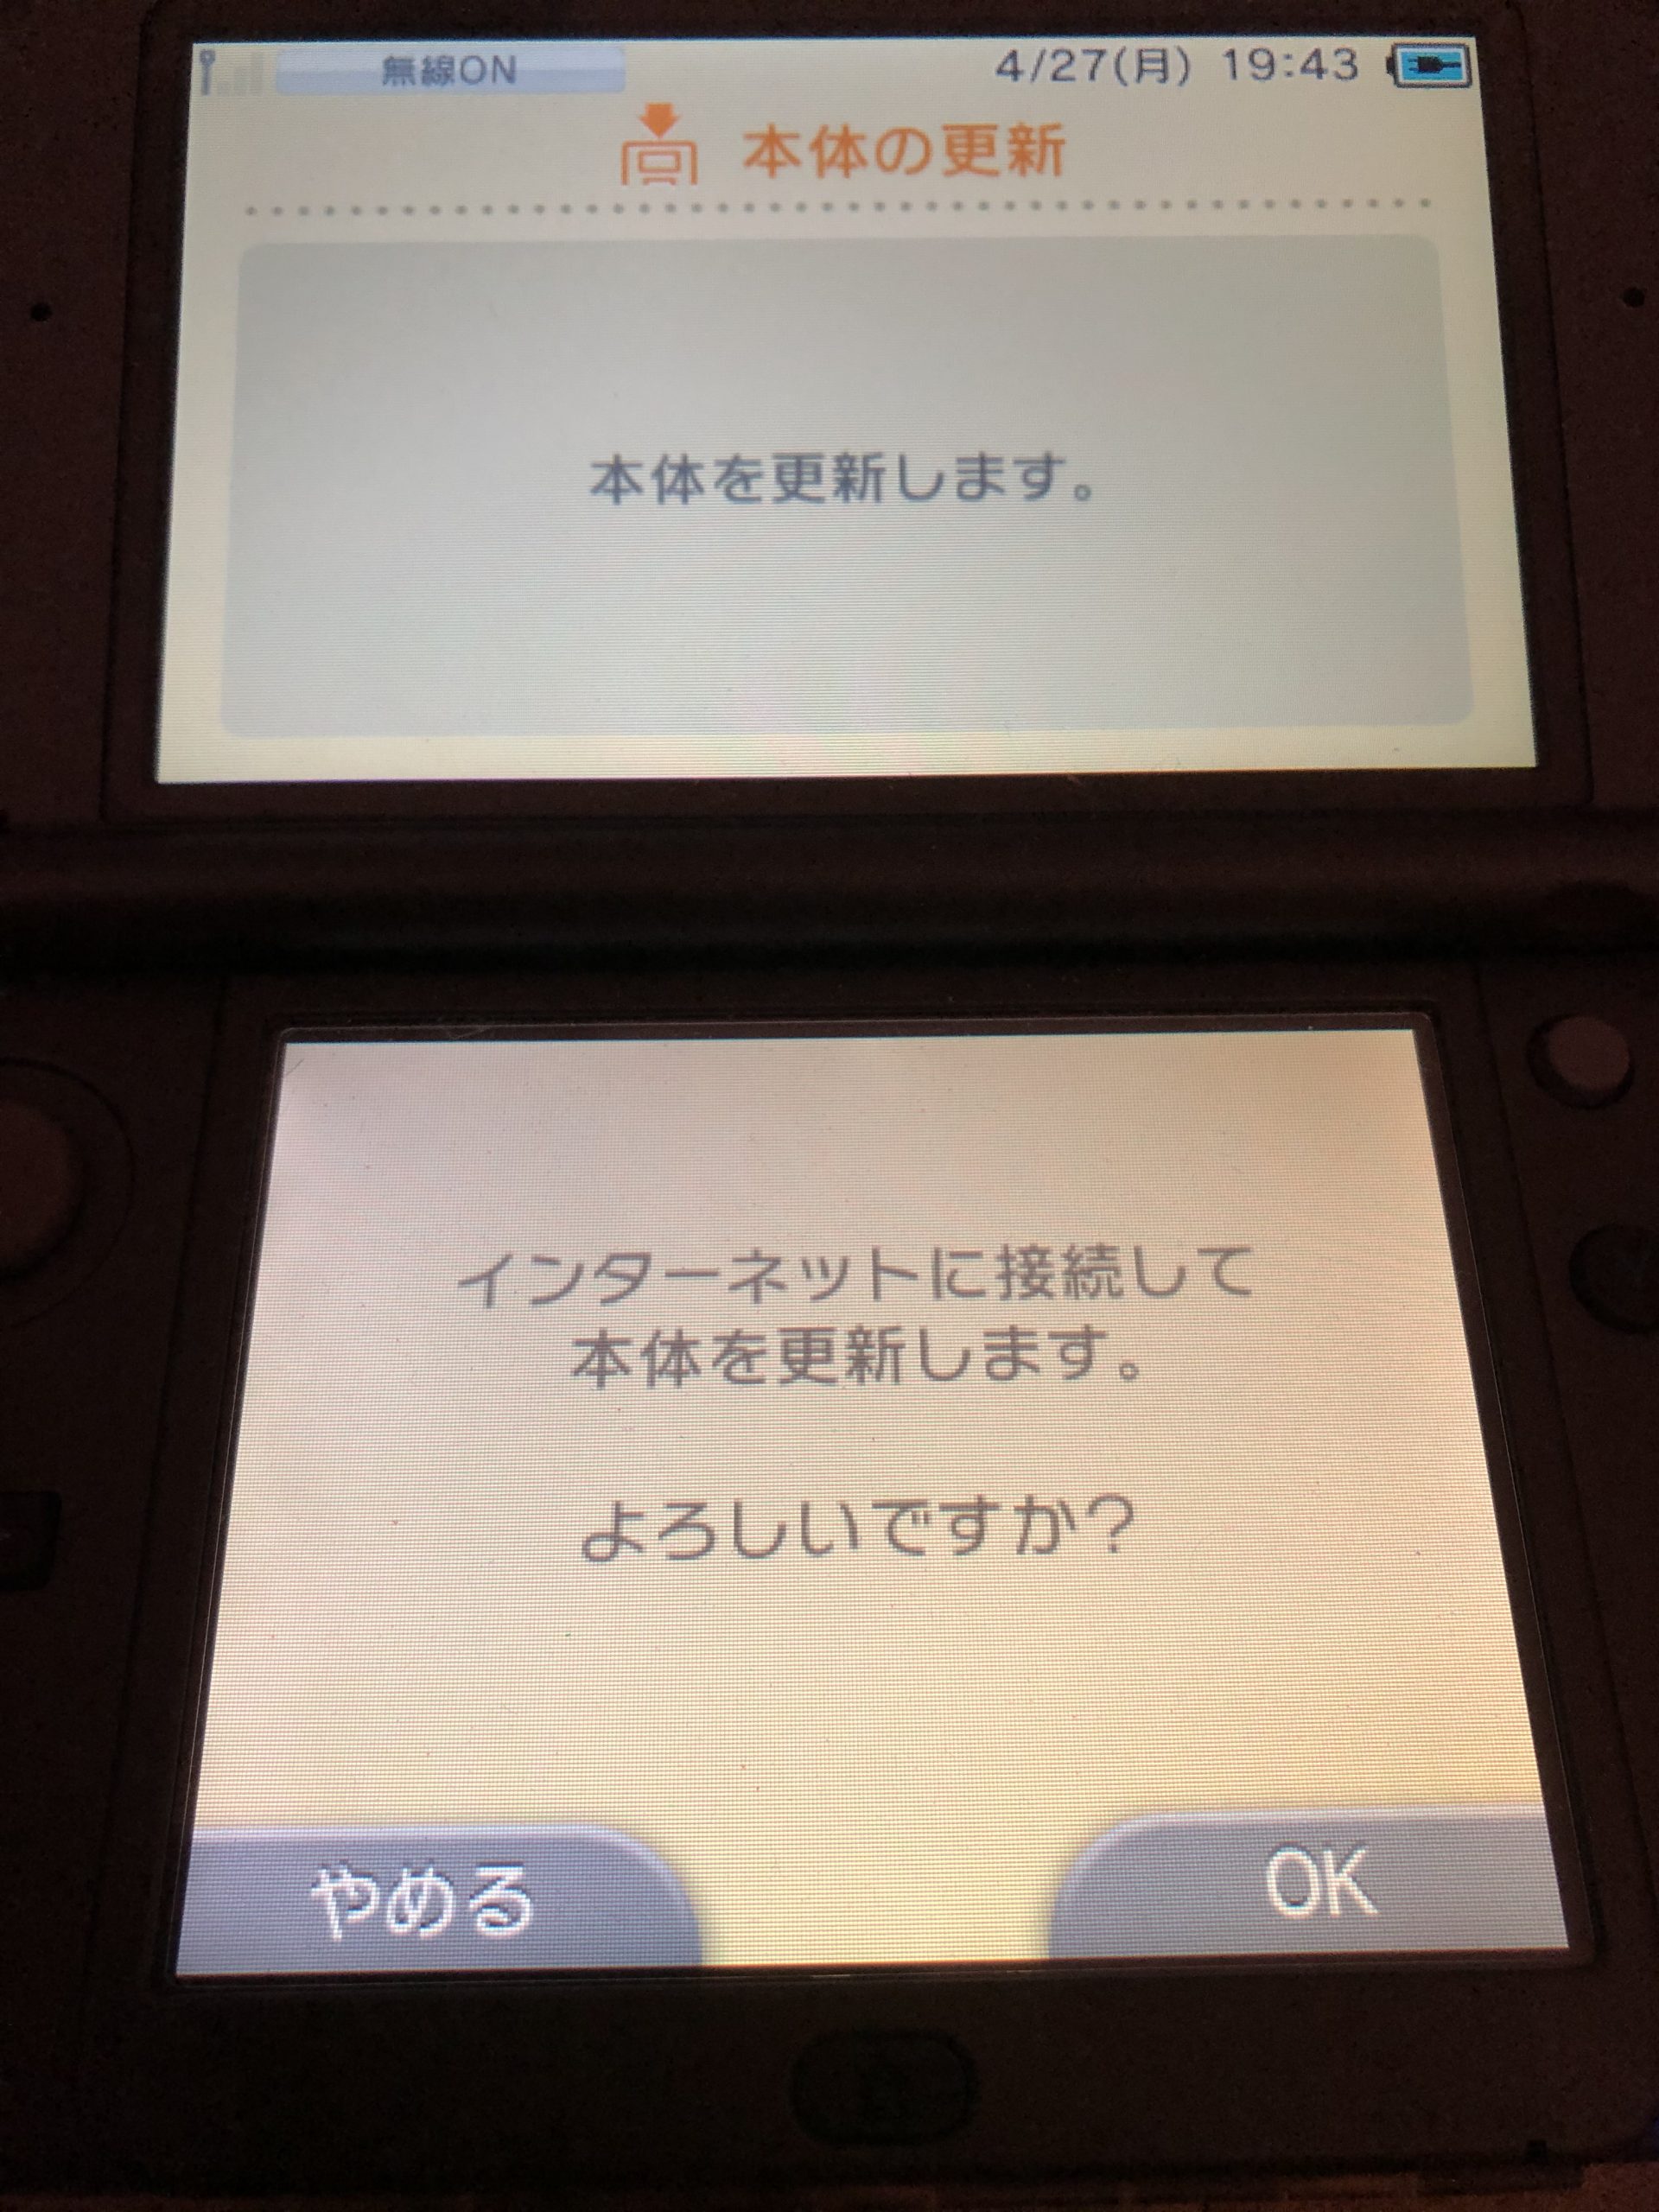 New3ds 2dsのブラウザでhomebrew Launcher起動 New Browserhax By Zoogie 大人のためのゲーム講座